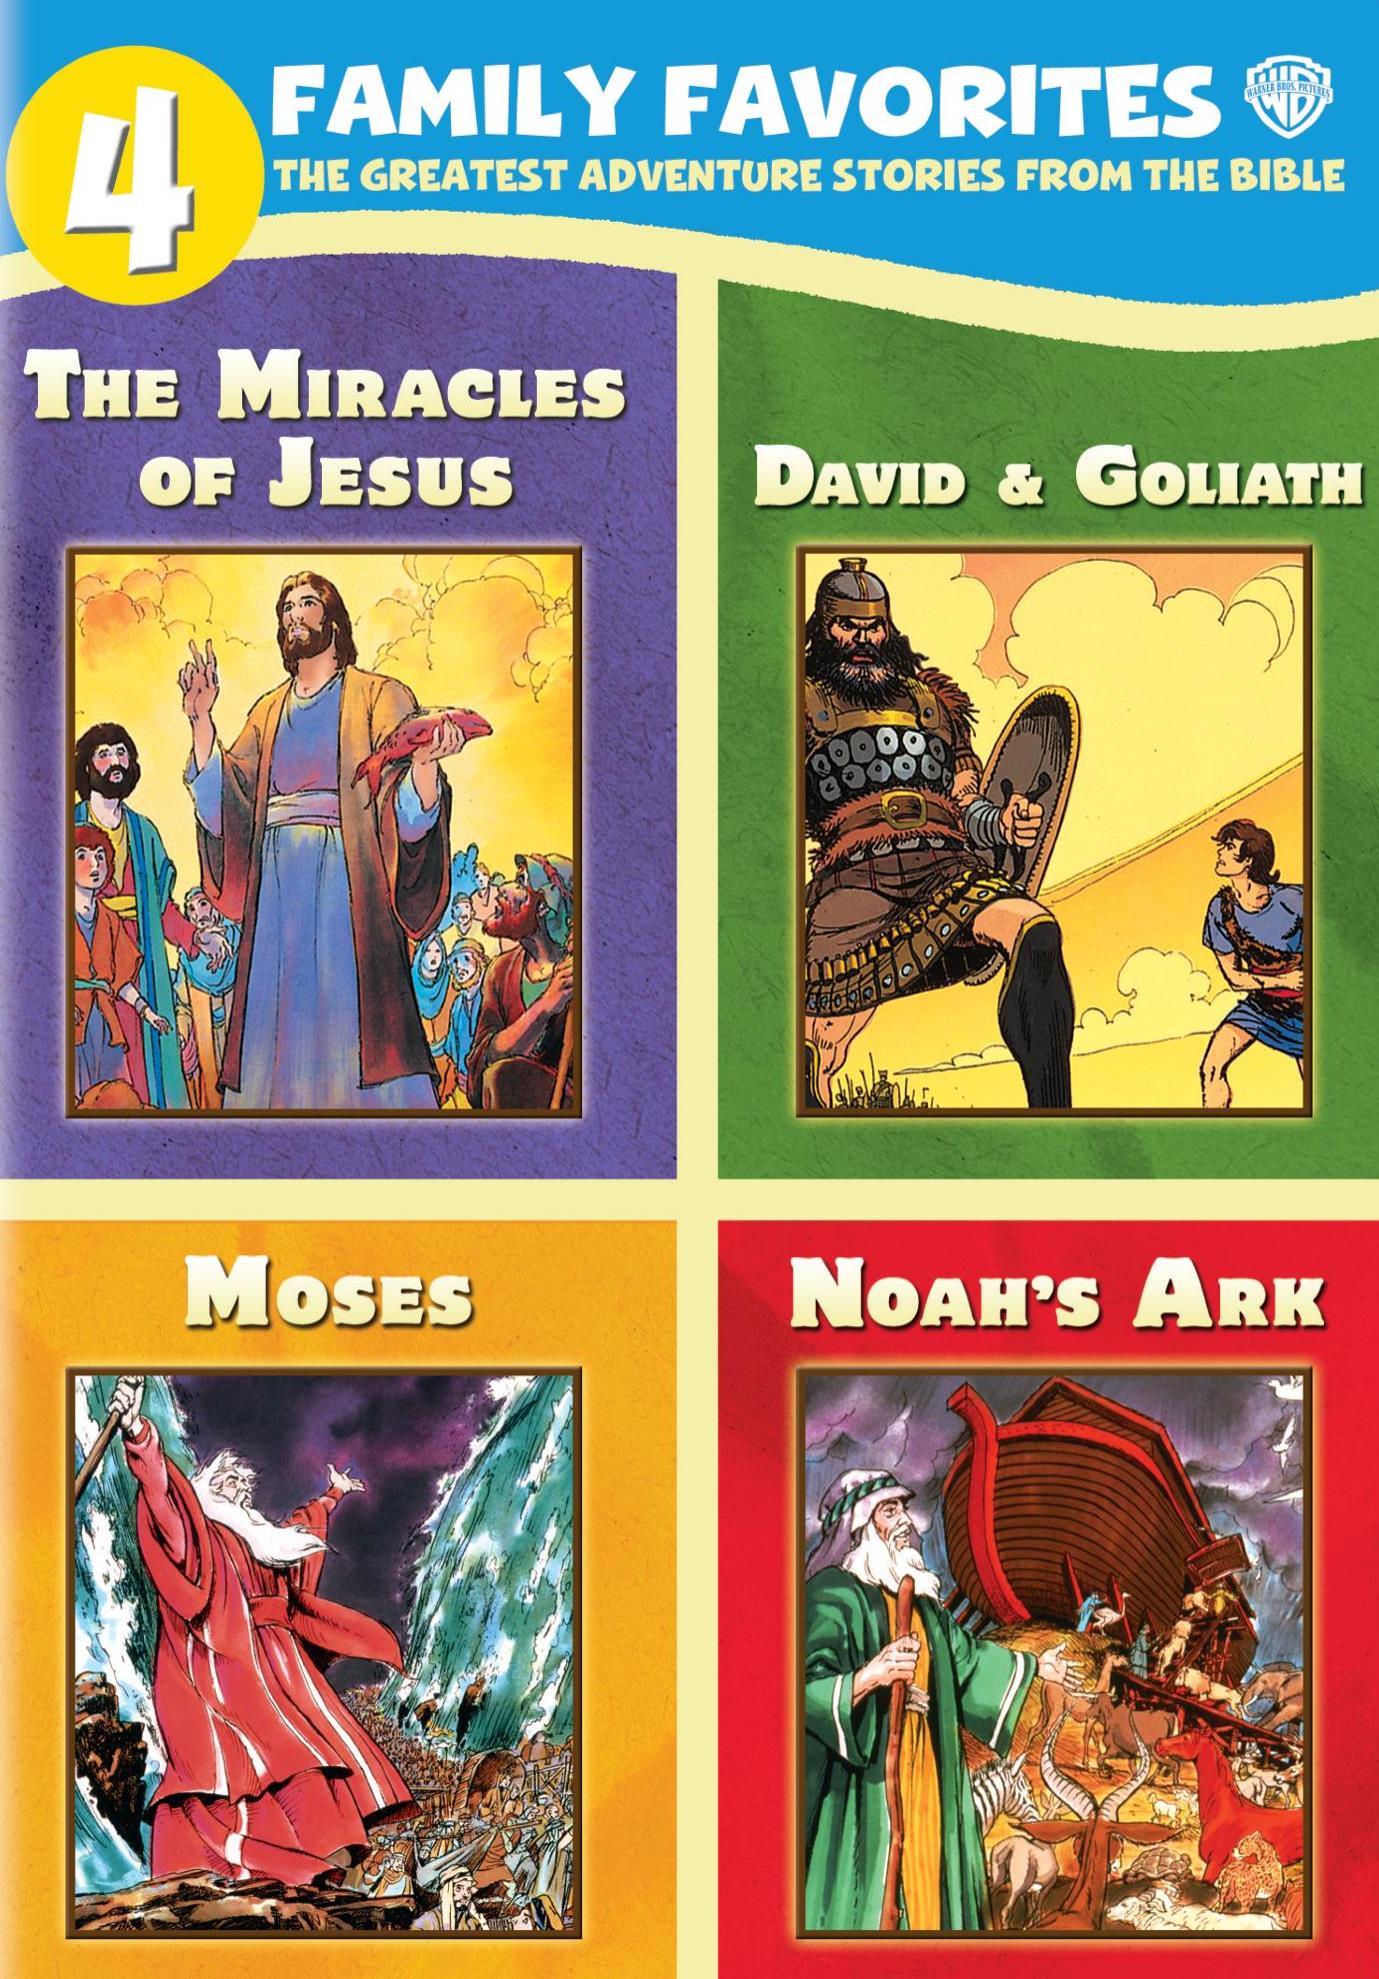 Greatest adventure stories from the bible